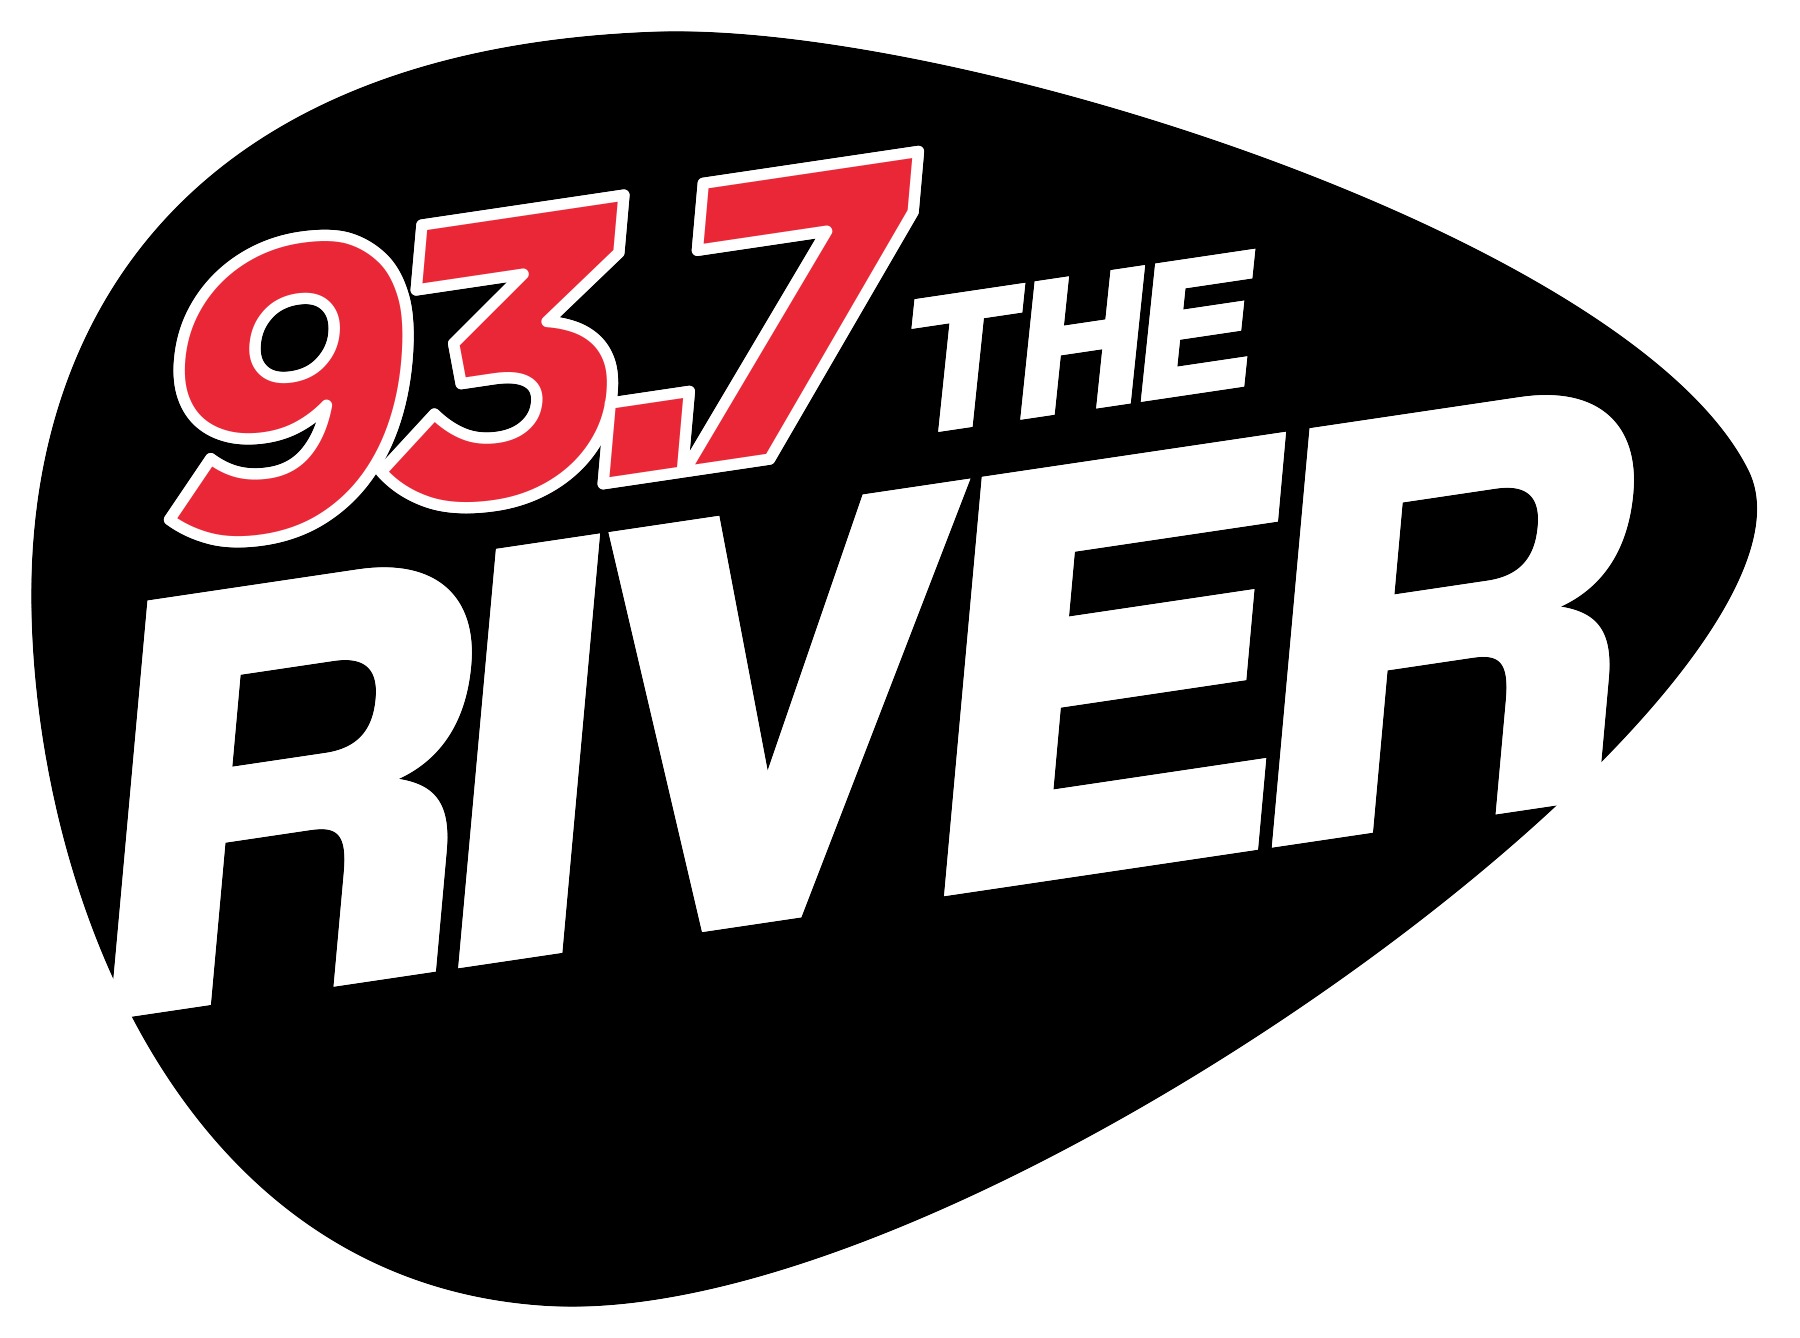 937 The River